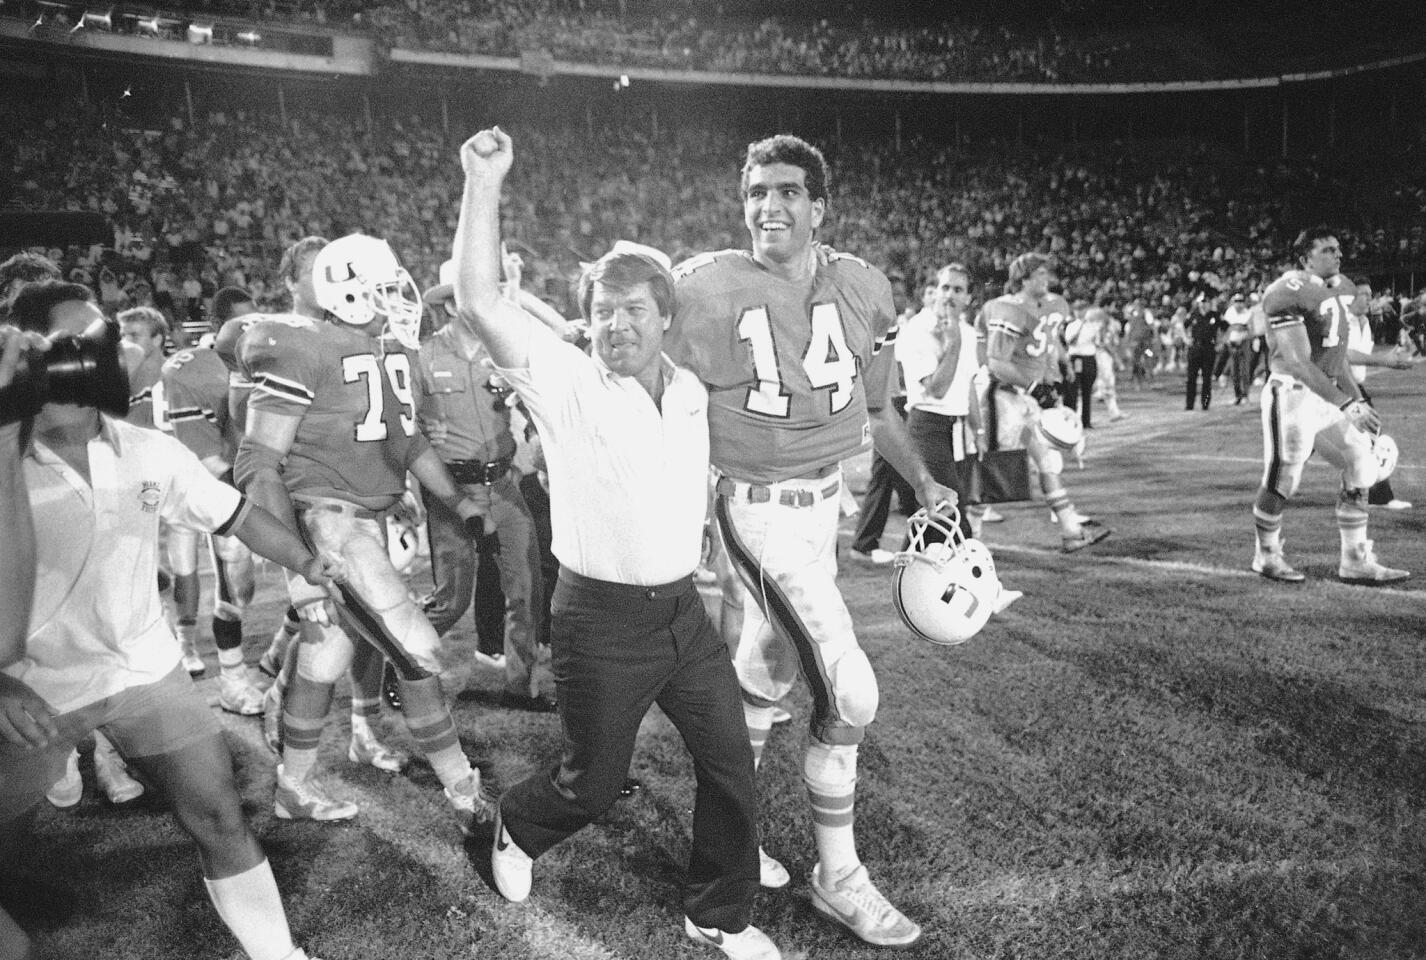 FILE - In this Dec. 2, 1985, file photo, University of Miami football coach Jimmy Johnson leaves the field with quarterback Vinny Testaverde after the Hurricanes defeated Notre Dame, 58-7 in Miami. Testaverde, Danny Wuerffel, Tommie Frazier, Ron Dayne and Orlando Pace headline the latest class getting enshrined in the College Football Hall of Fame. (AP Photo/Ray Fairall, File)